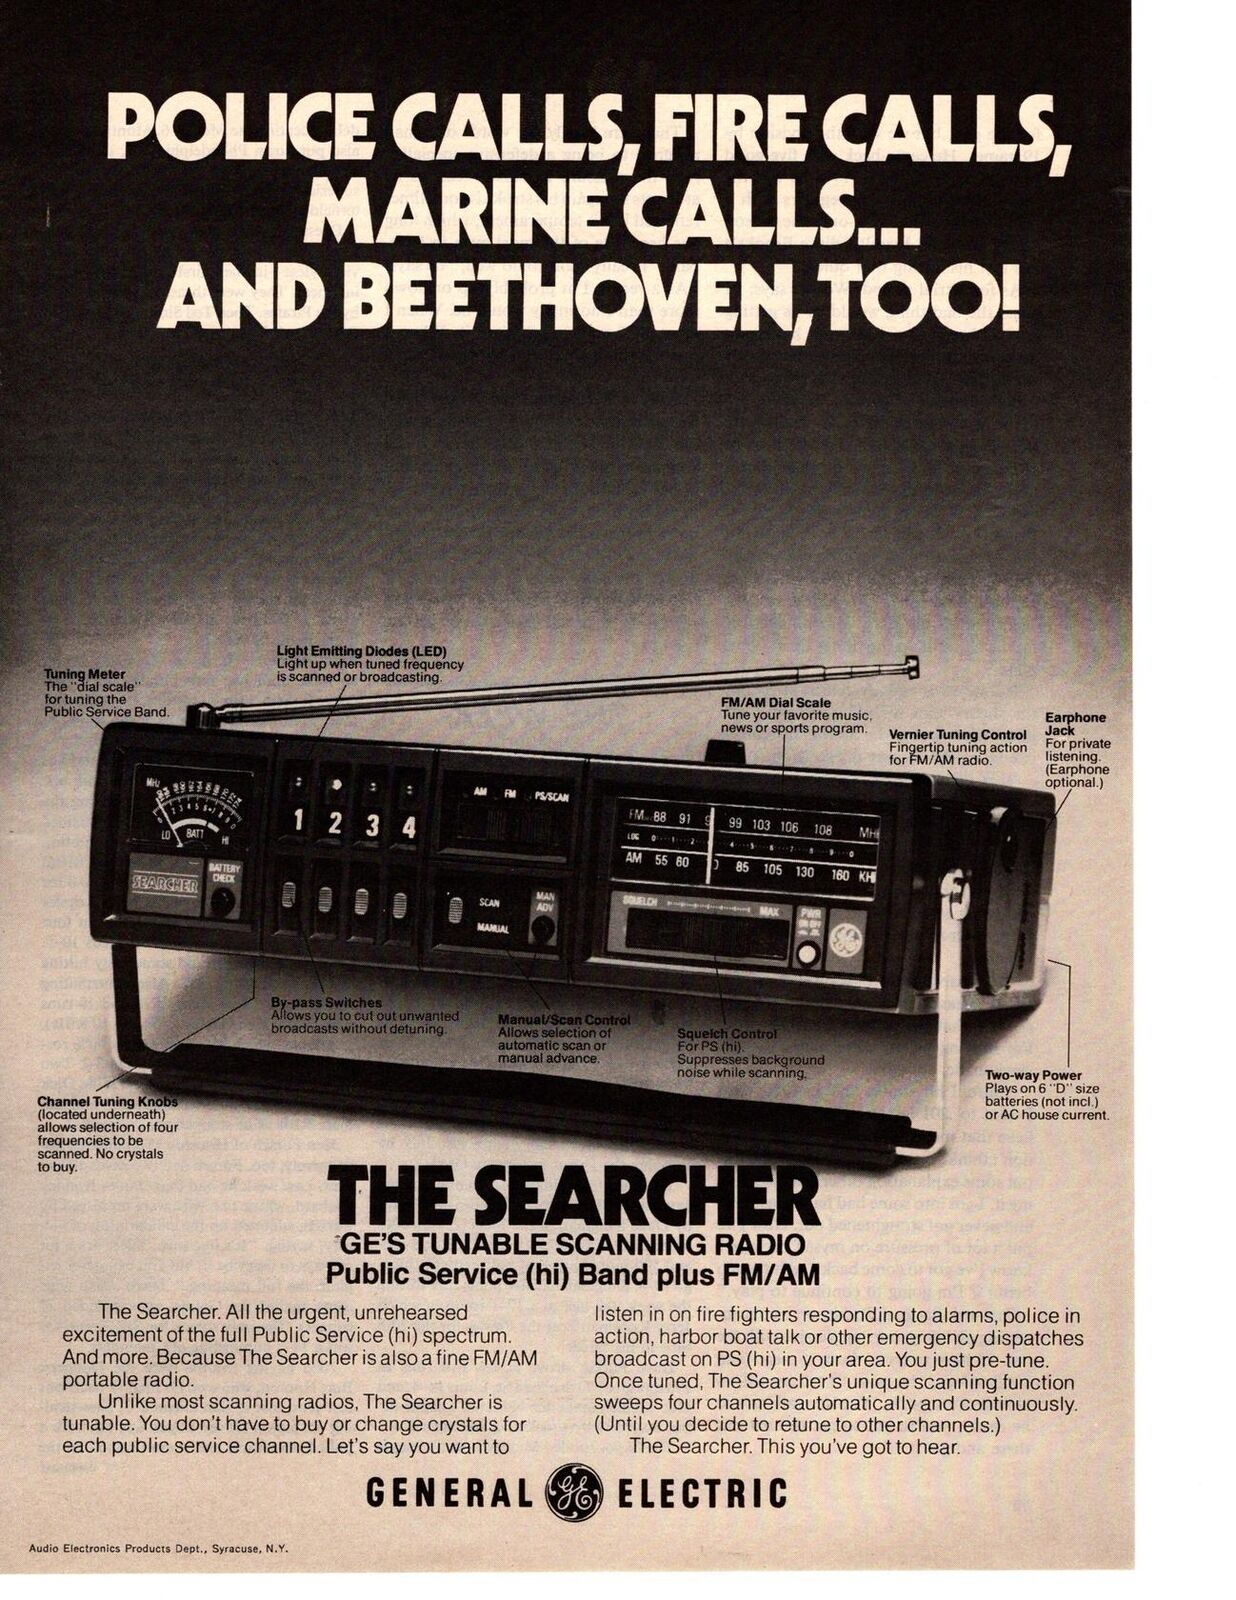 1976 GE General Electric Searcher Tunable Scanning Radio Police Scanner Print Ad